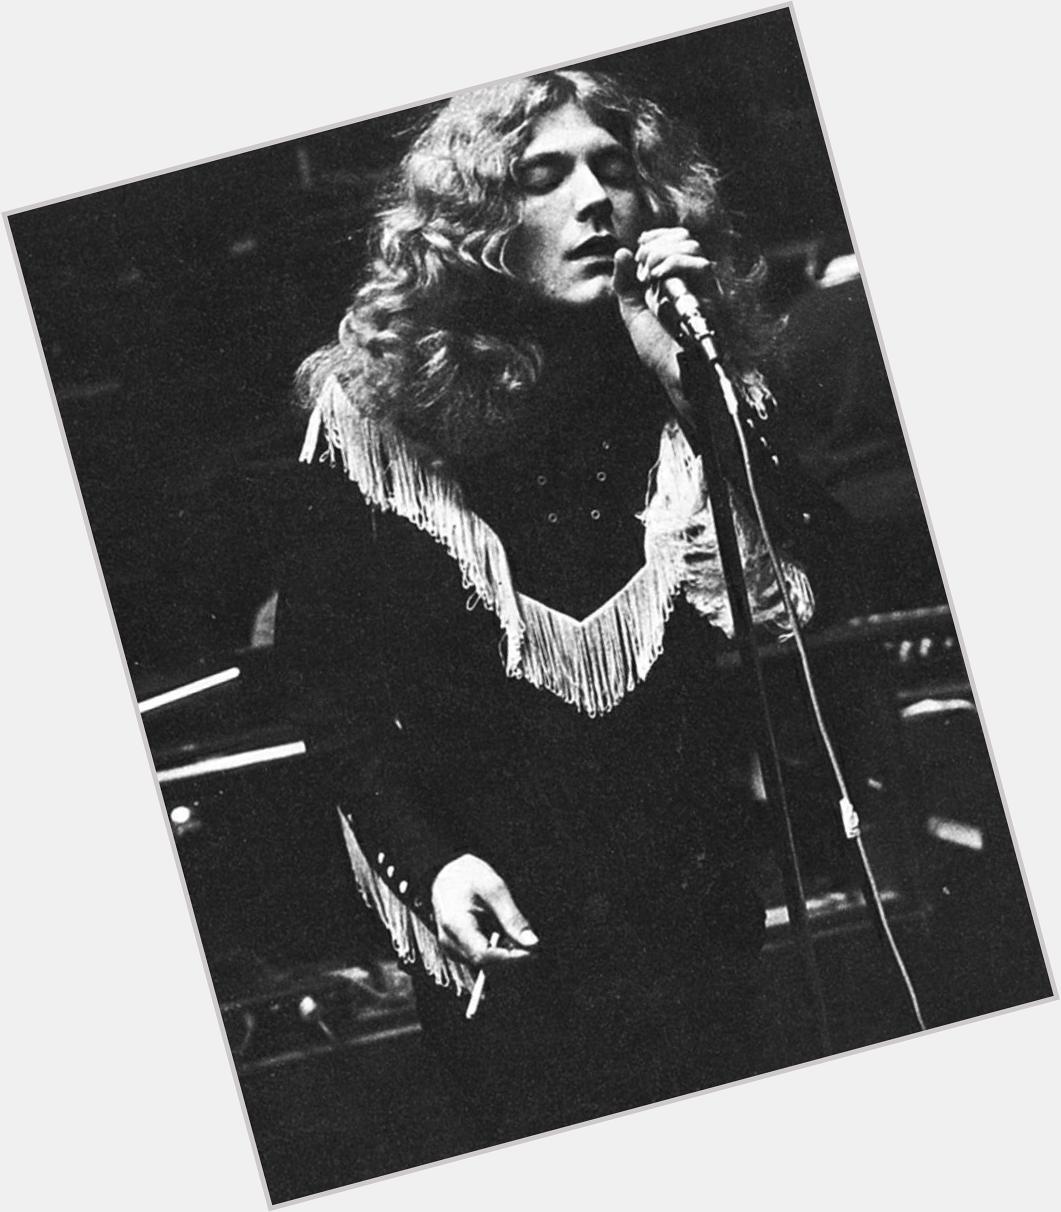 Happy birthday to the one and only Golden God, Robert Plant! 